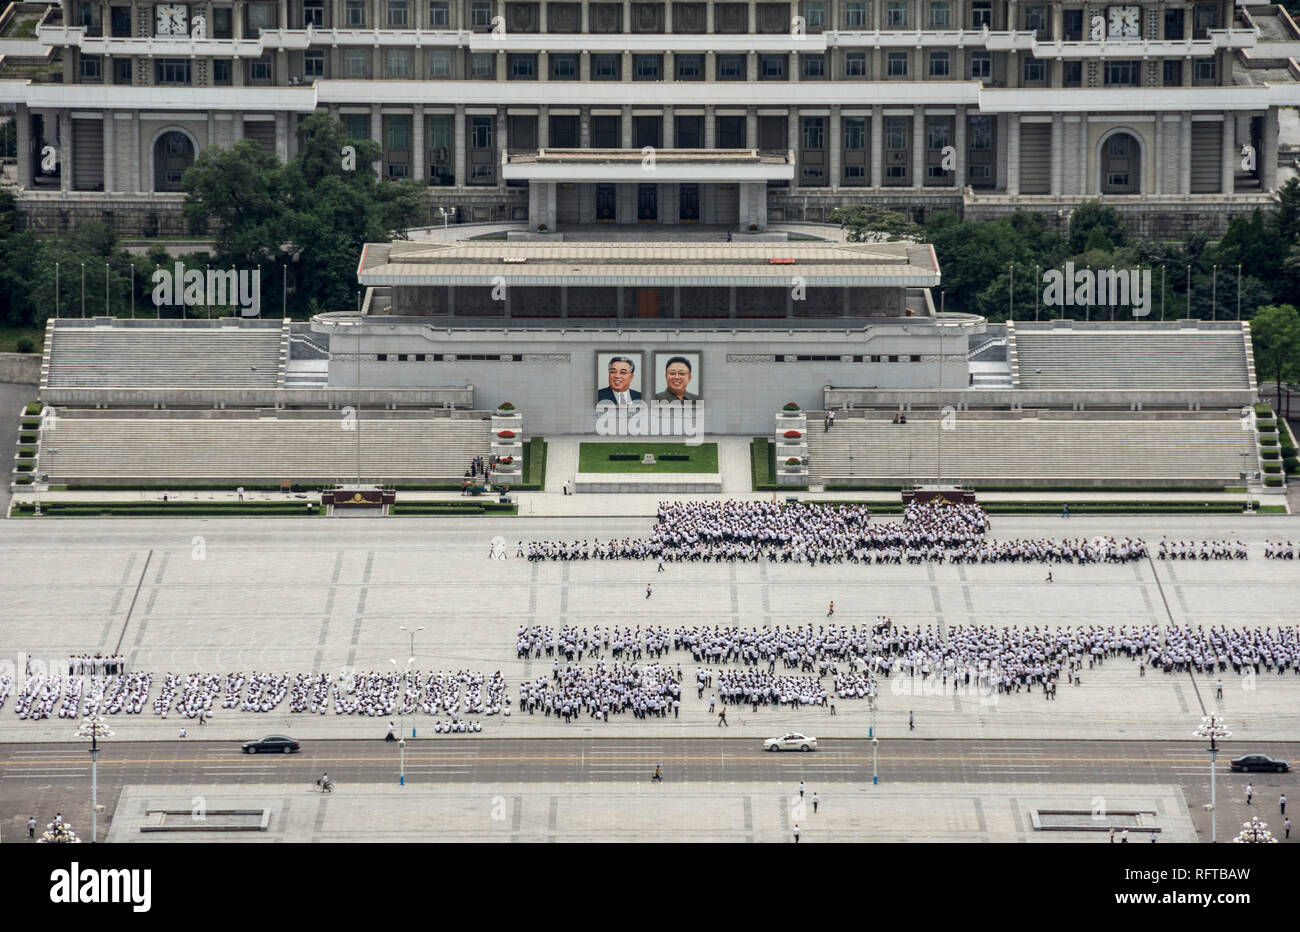 Kim Il Sung Square, hordes of young people rehearsing marching routines prior to a grand parade, Pyongyang, North Korea, Asia Stock Photo